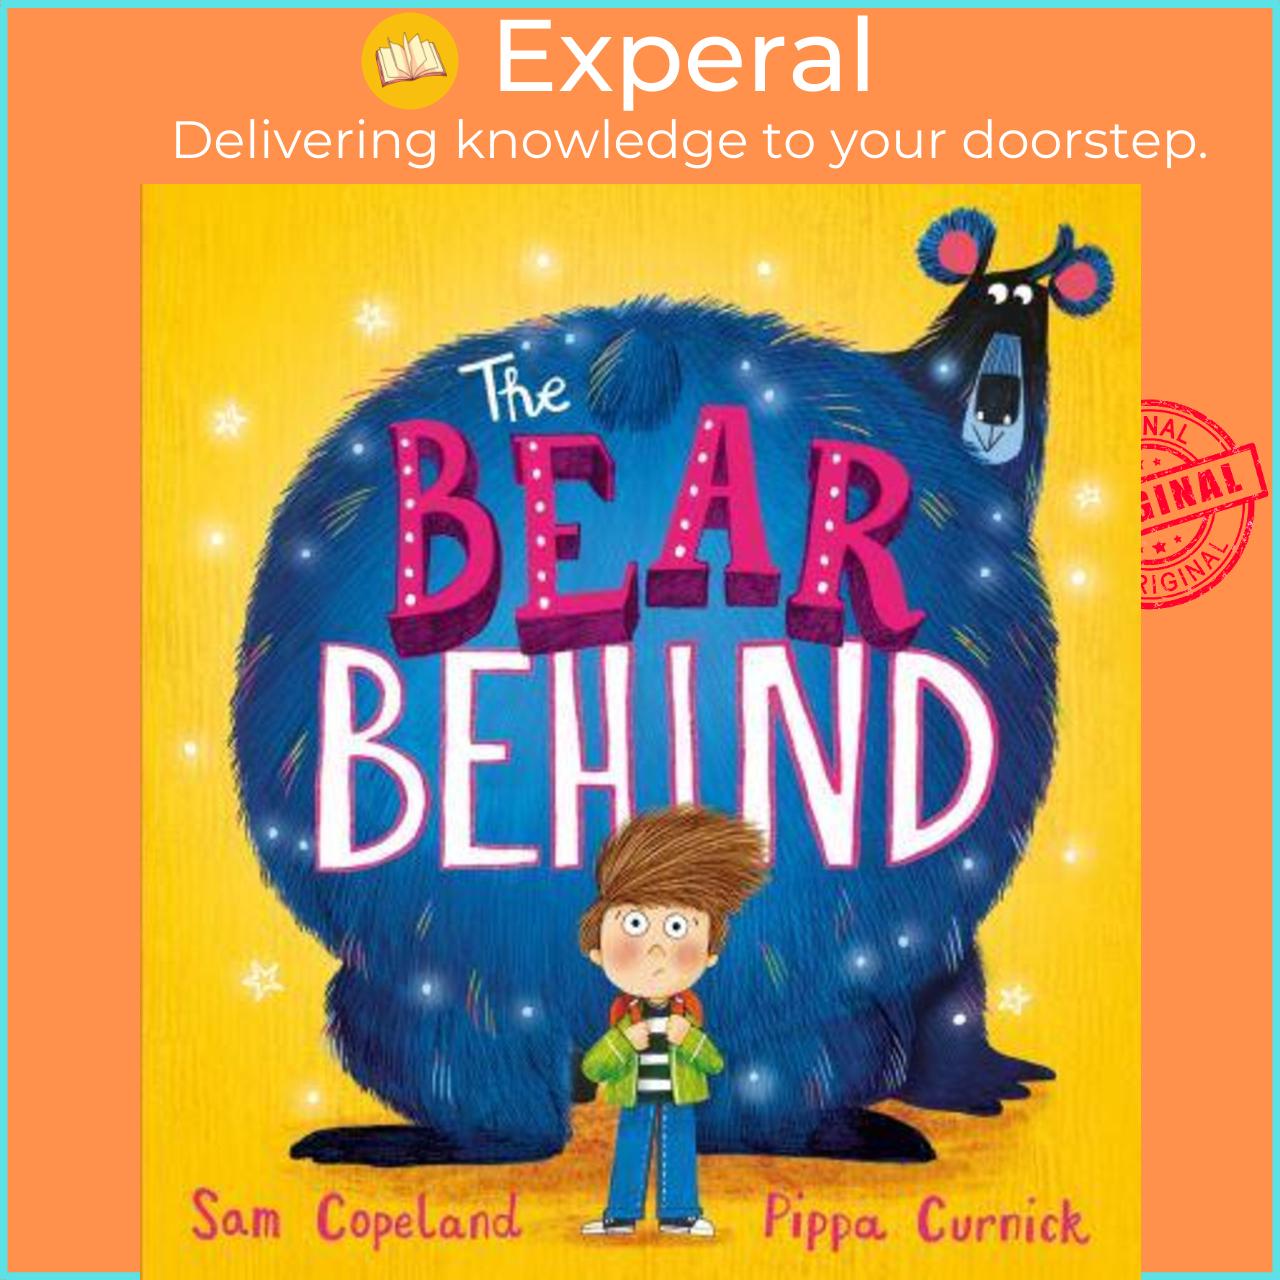 Sách - The Bear Behind - The Bear Behind by Sam Copeland (author),Pippa Curnick (artist) (UK edition, Paperback)